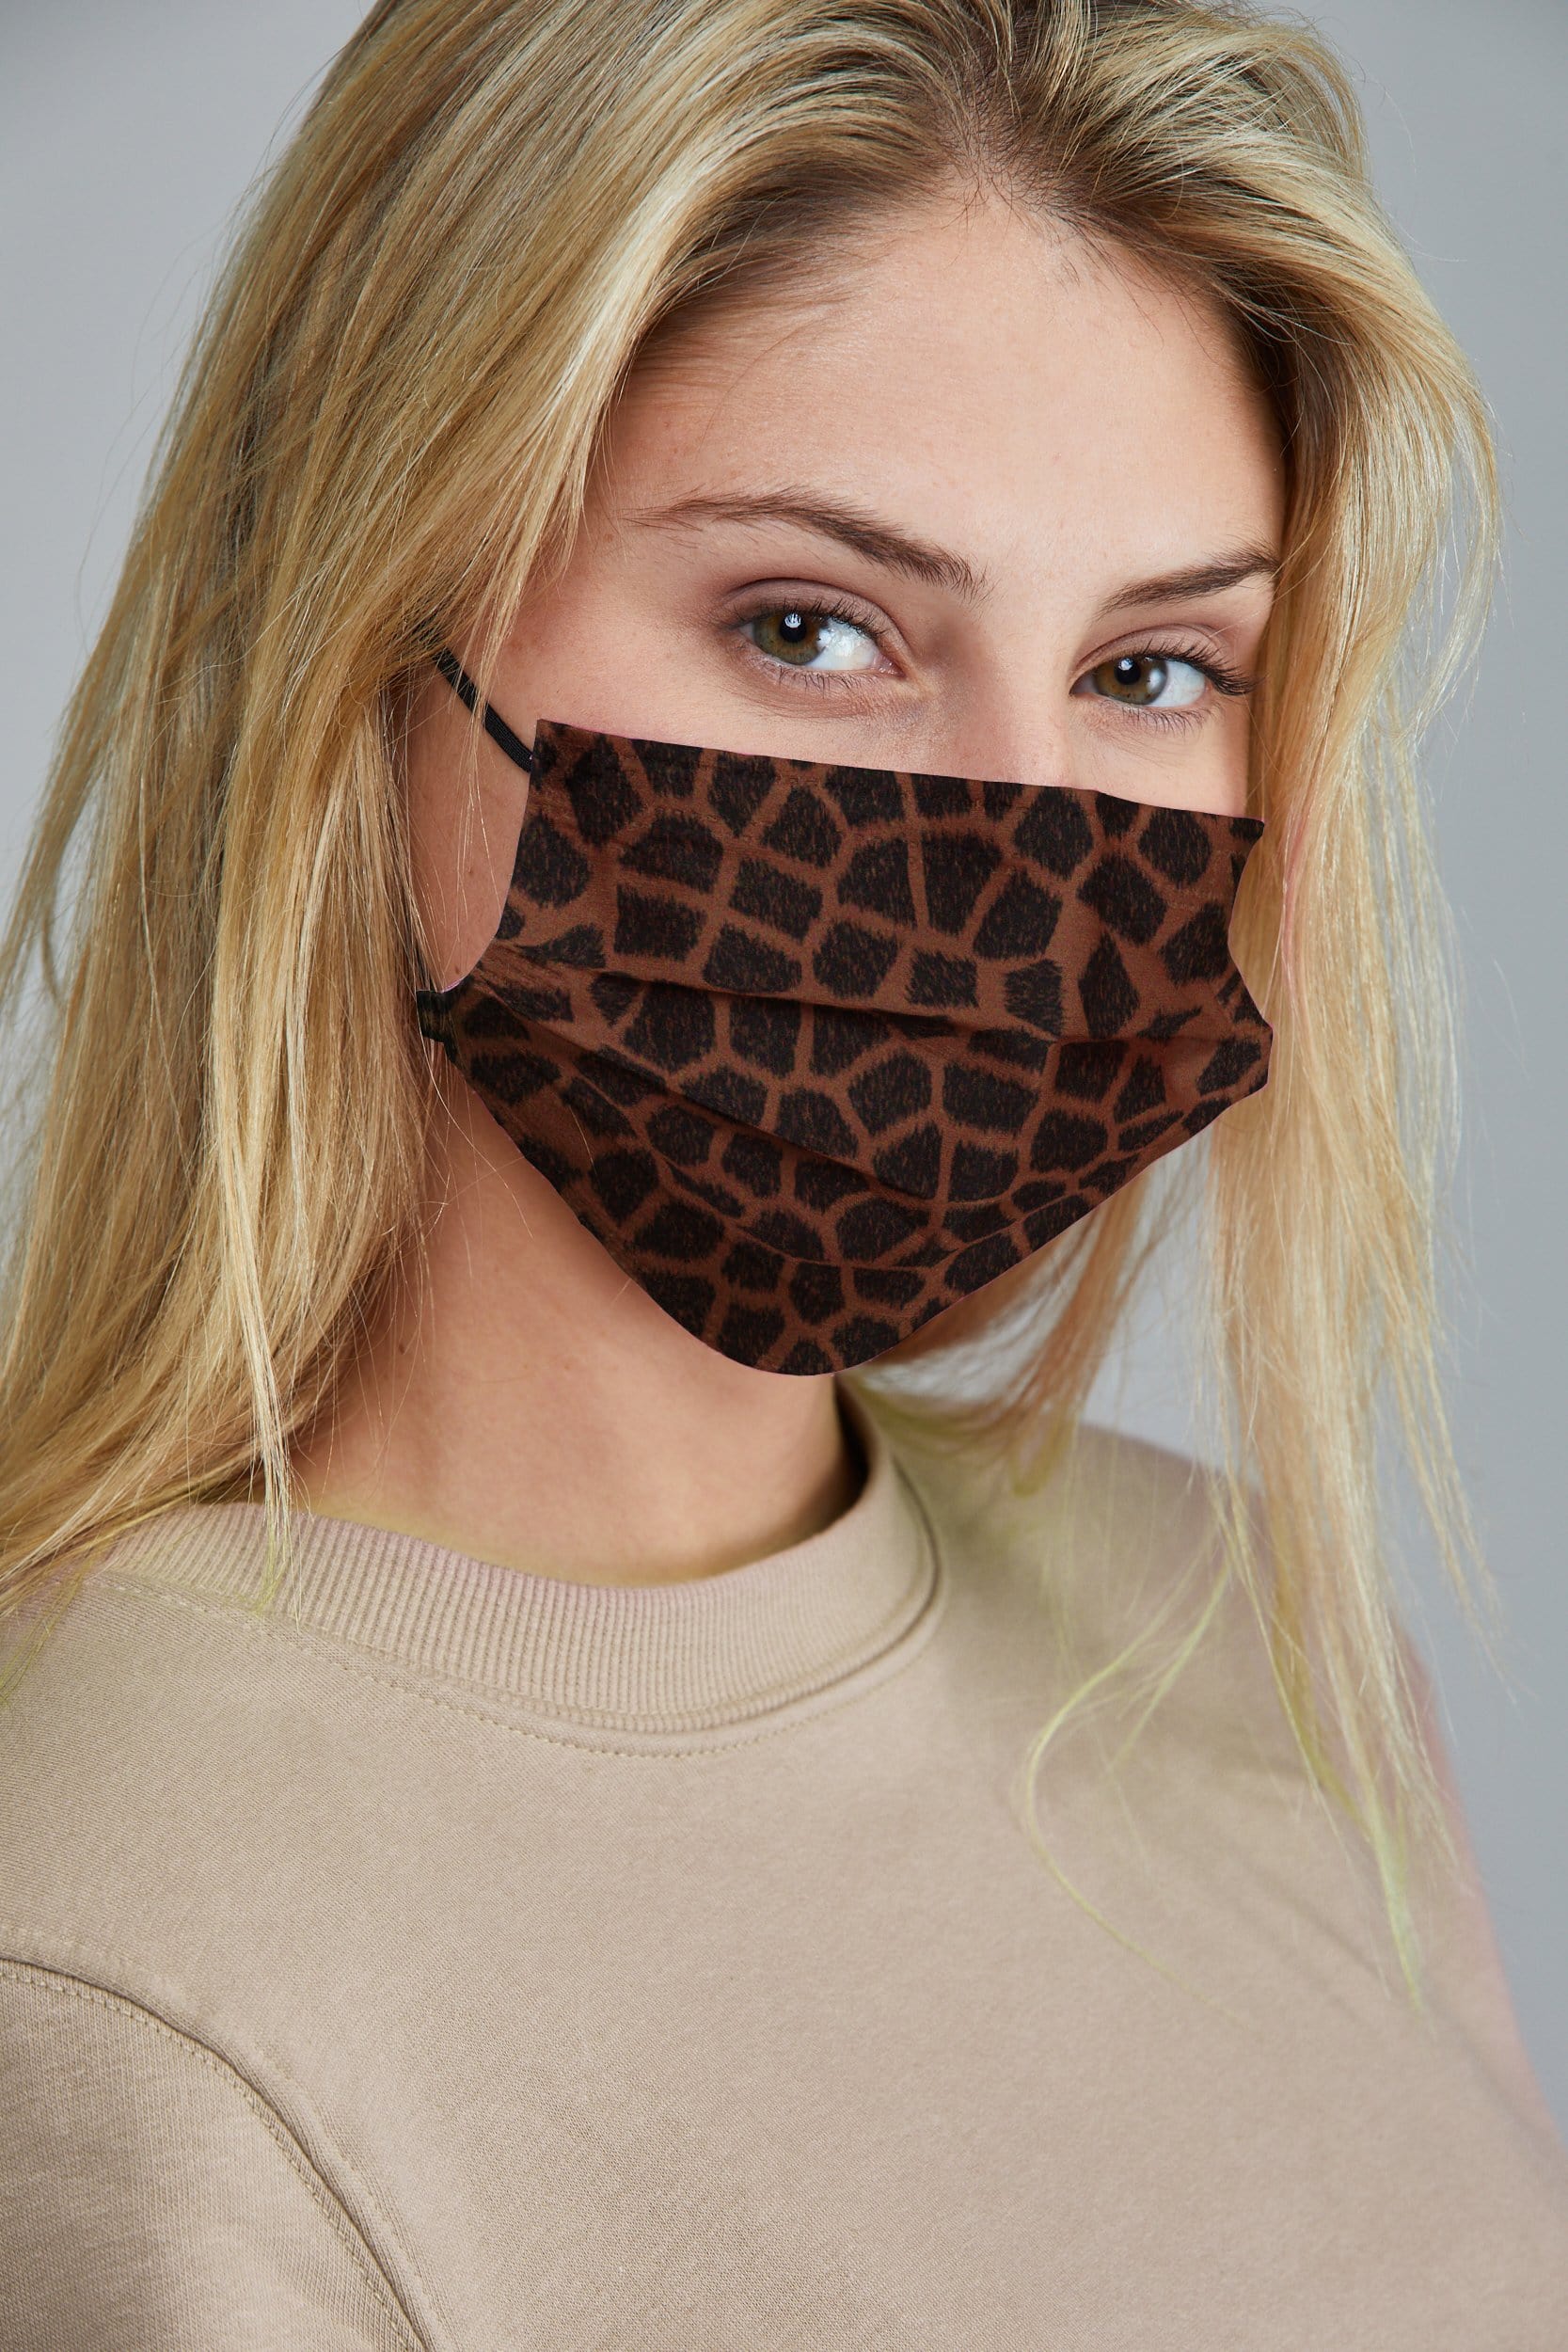 Woman wearing stylish Giraffe Printed Pleated face mask, with high quality breathable fabric. 